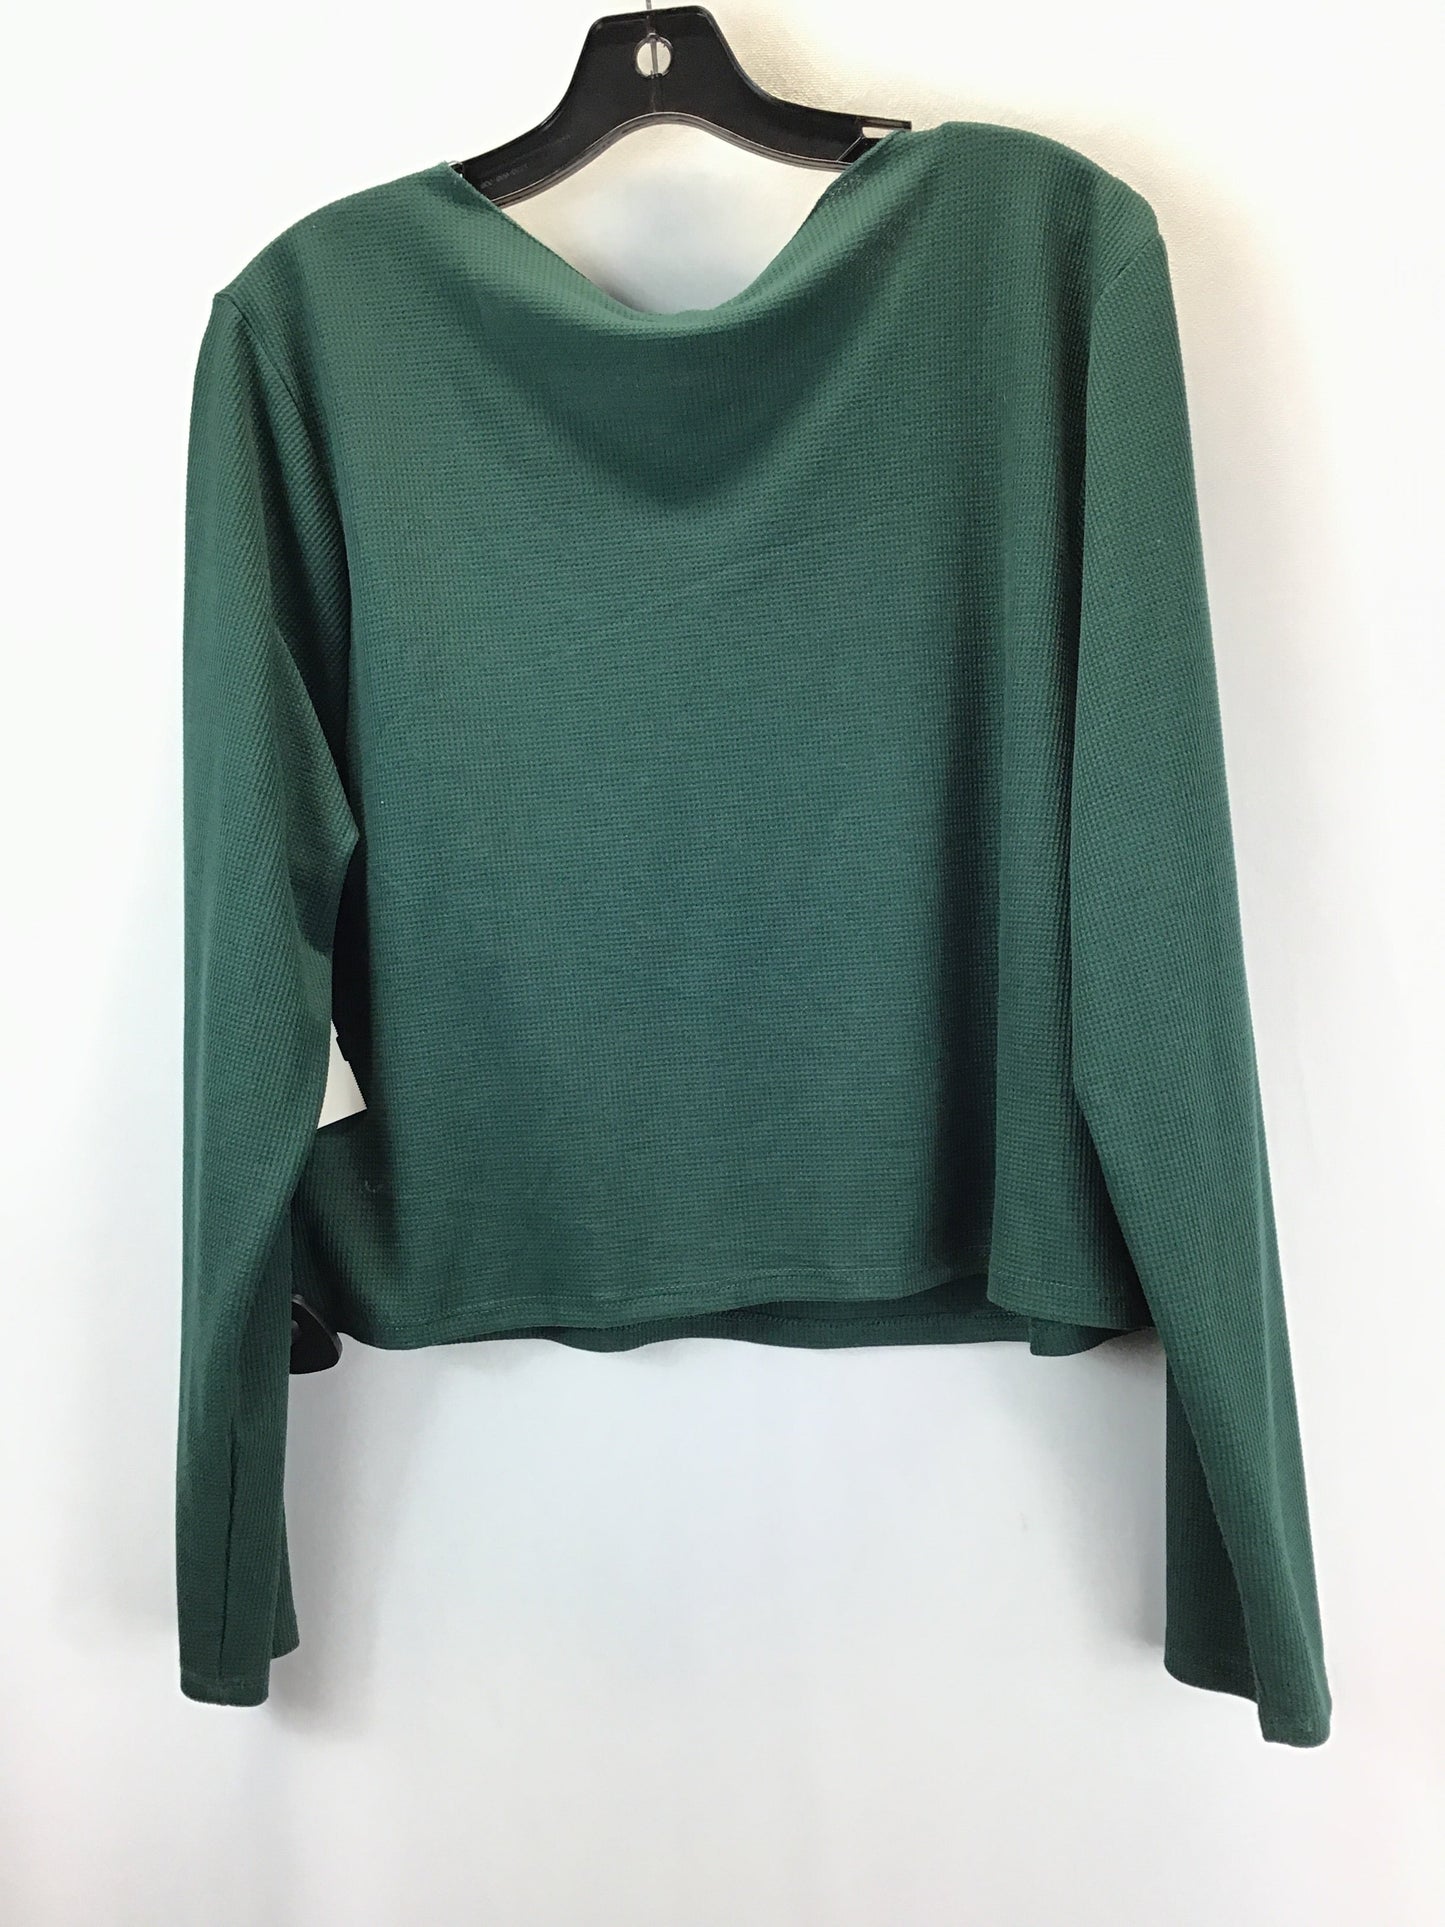 Top Long Sleeve By Wild Fable  Size: 2x